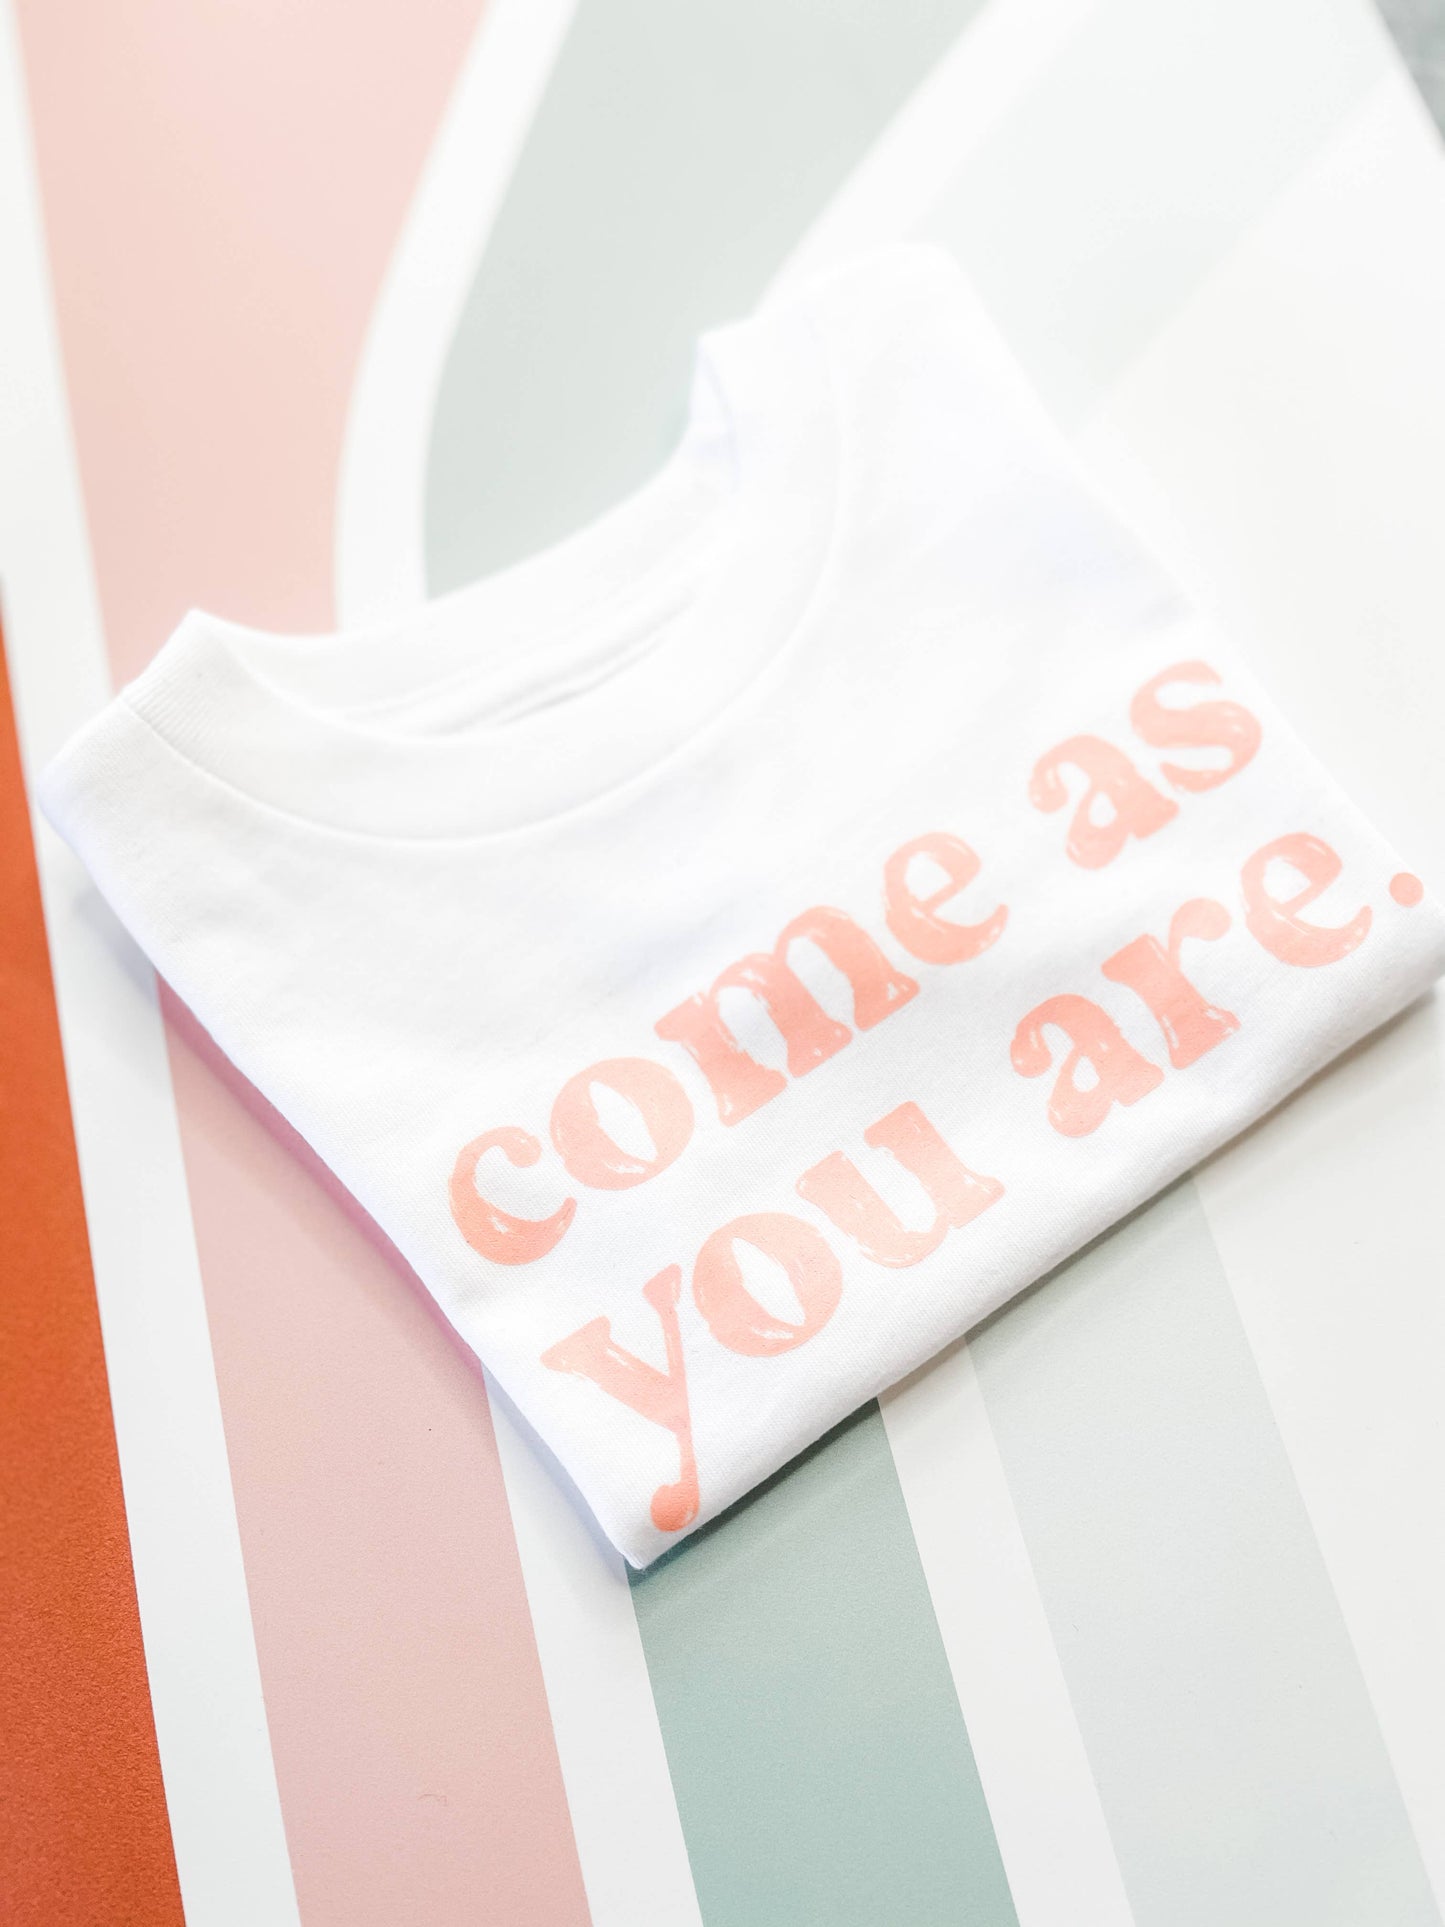 Come as you are - Tee